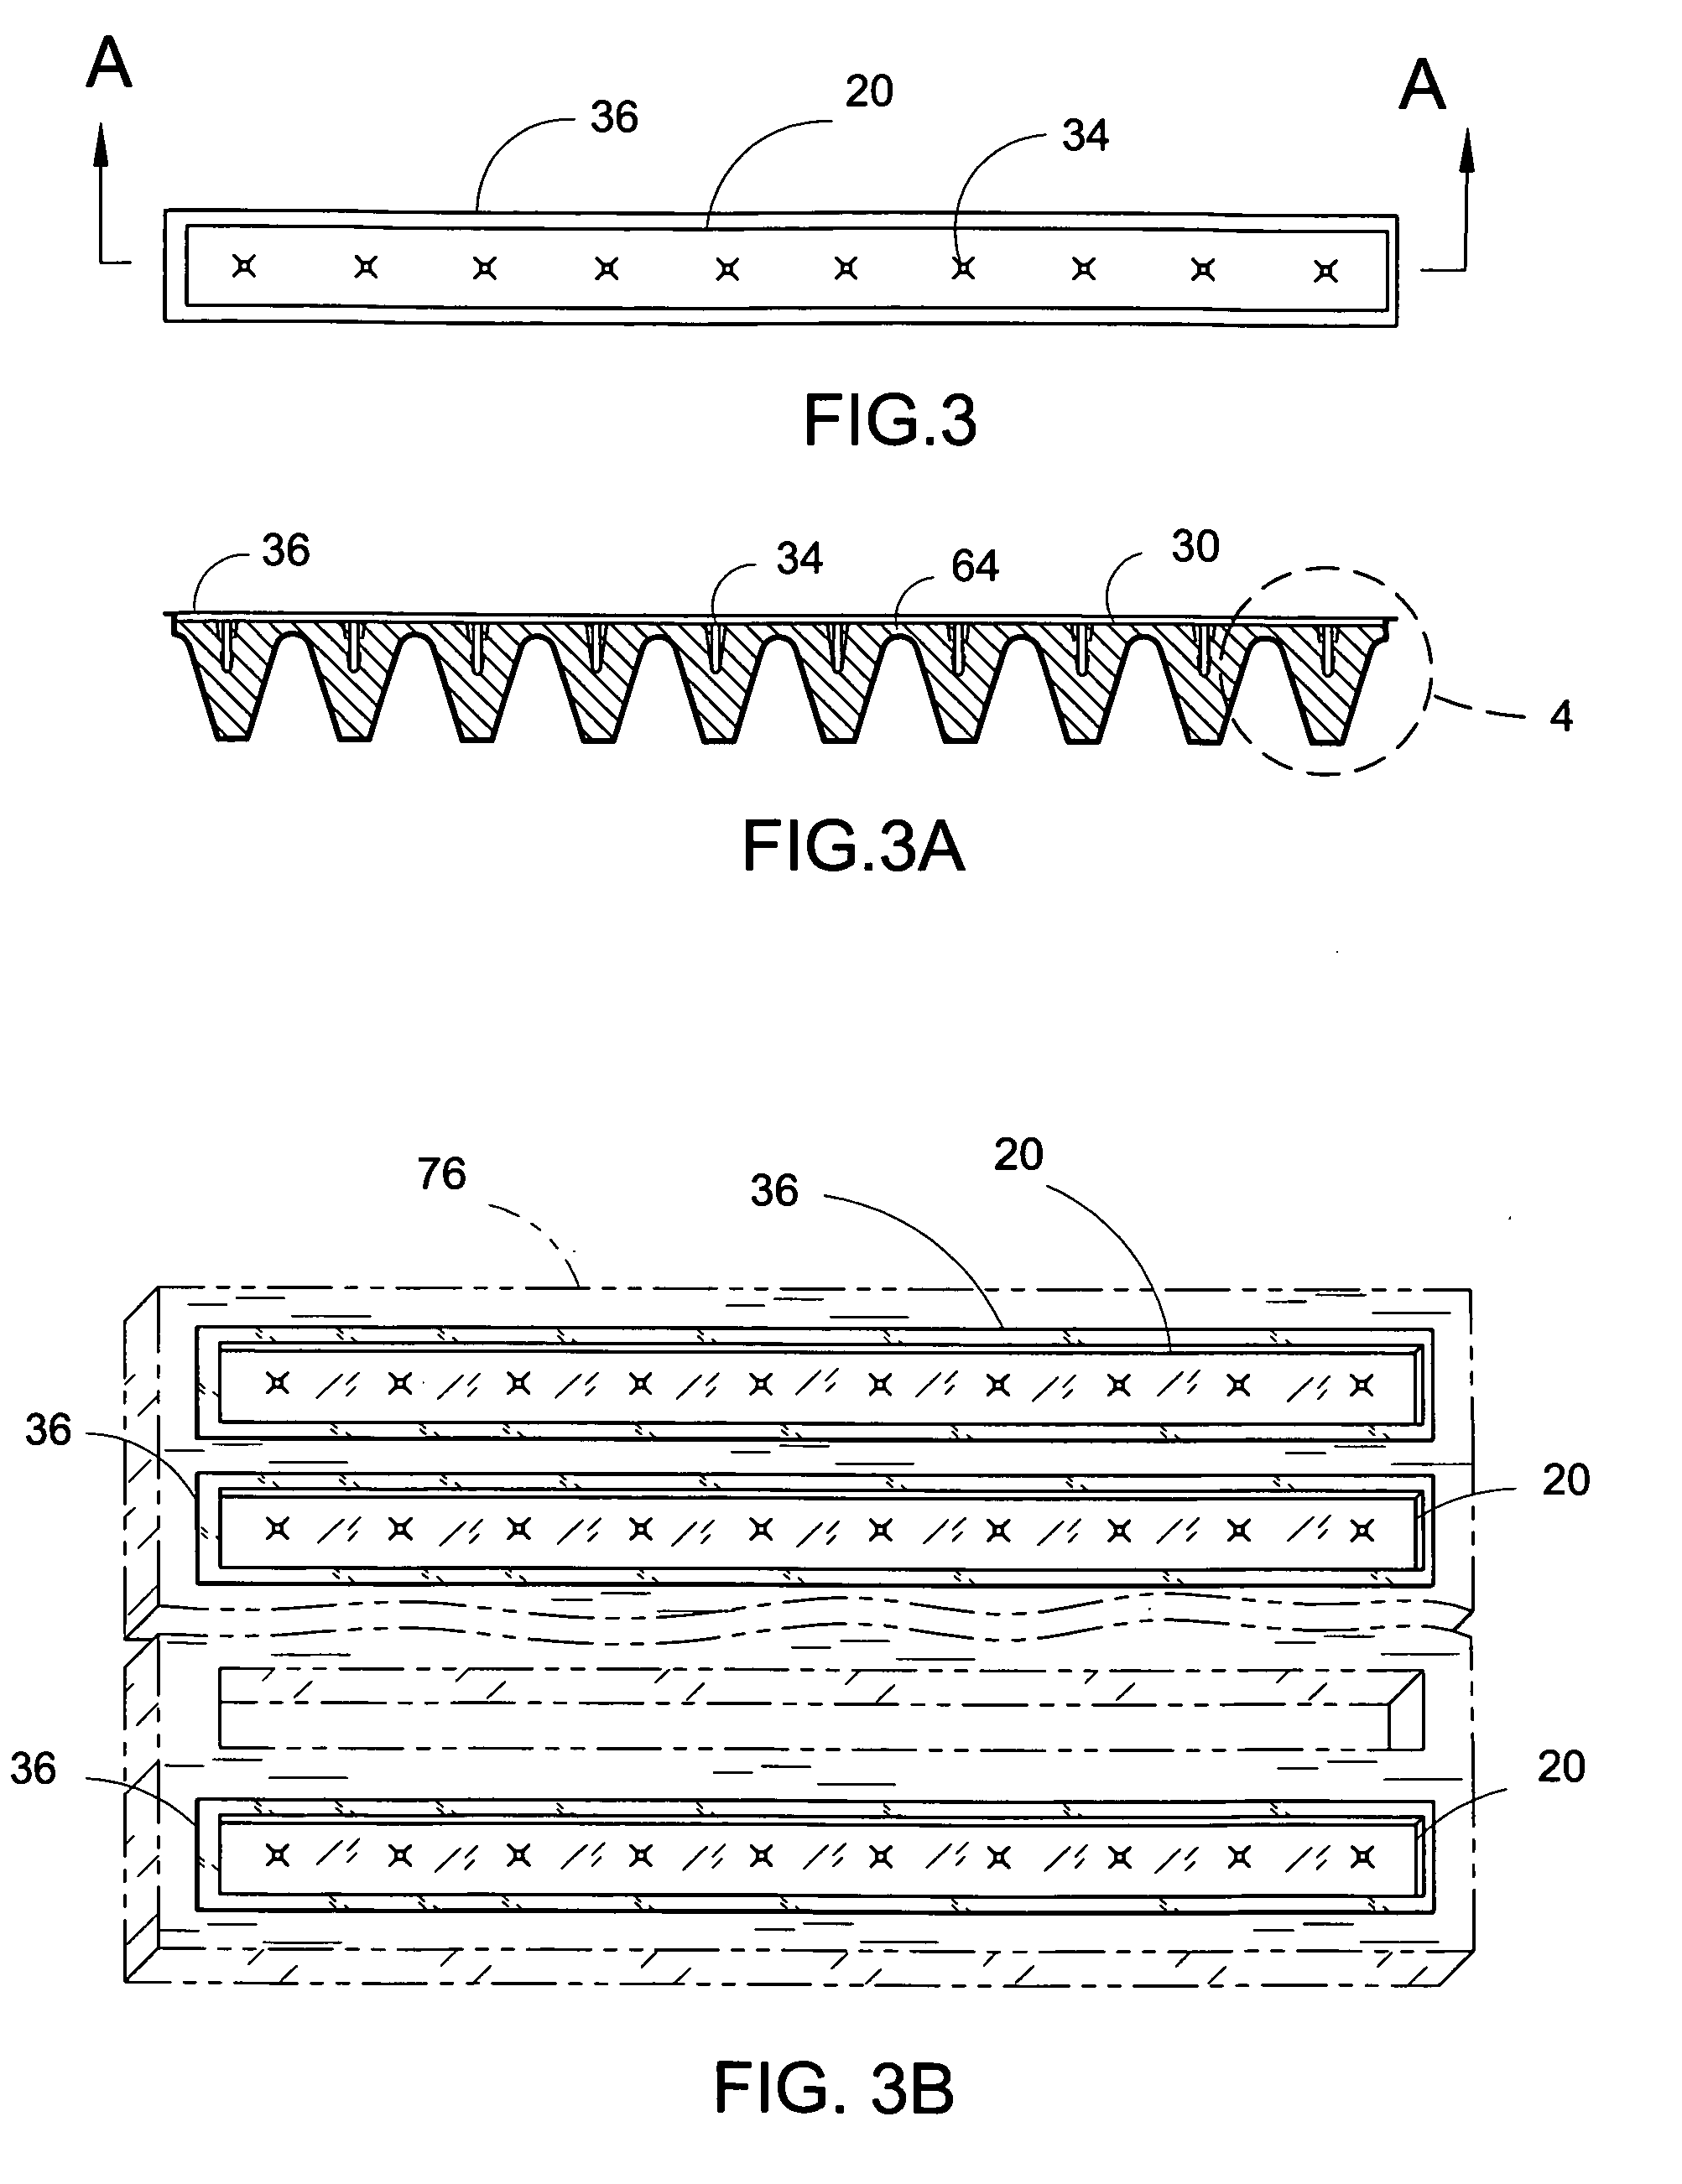 Method and apparatus for propagation and growth of plants in a sterile synthetic medium